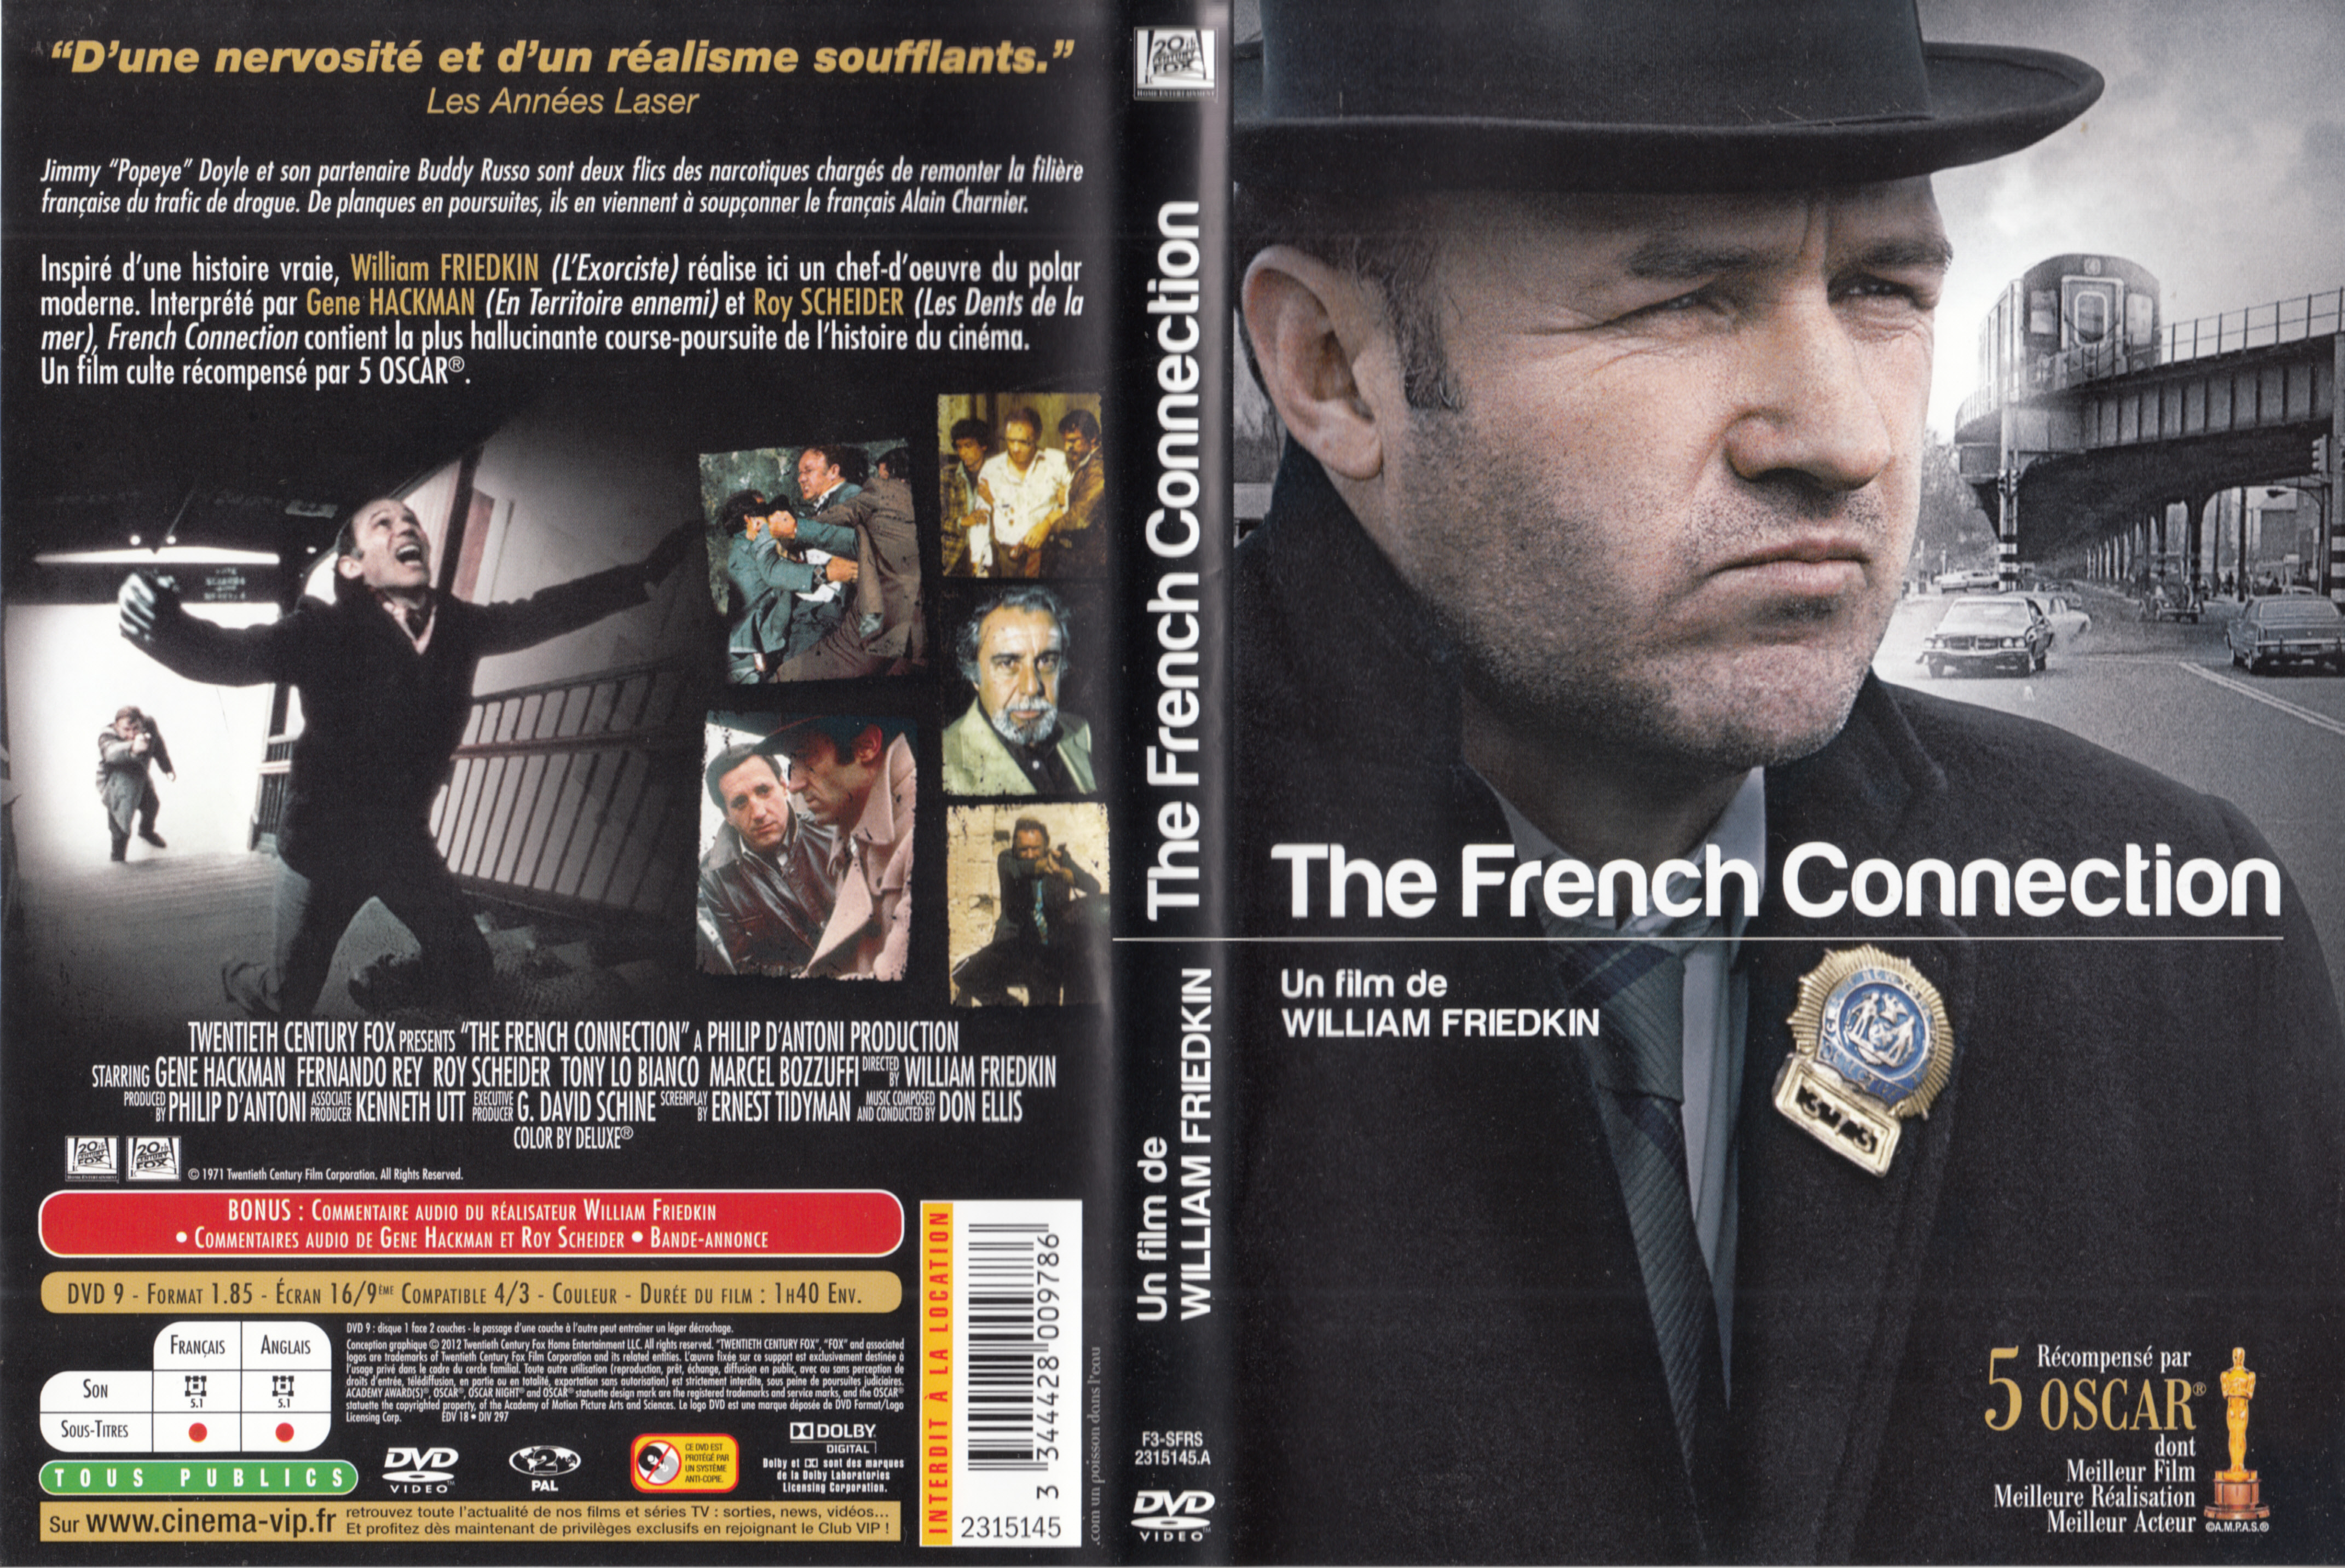 Jaquette DVD French Connection v3